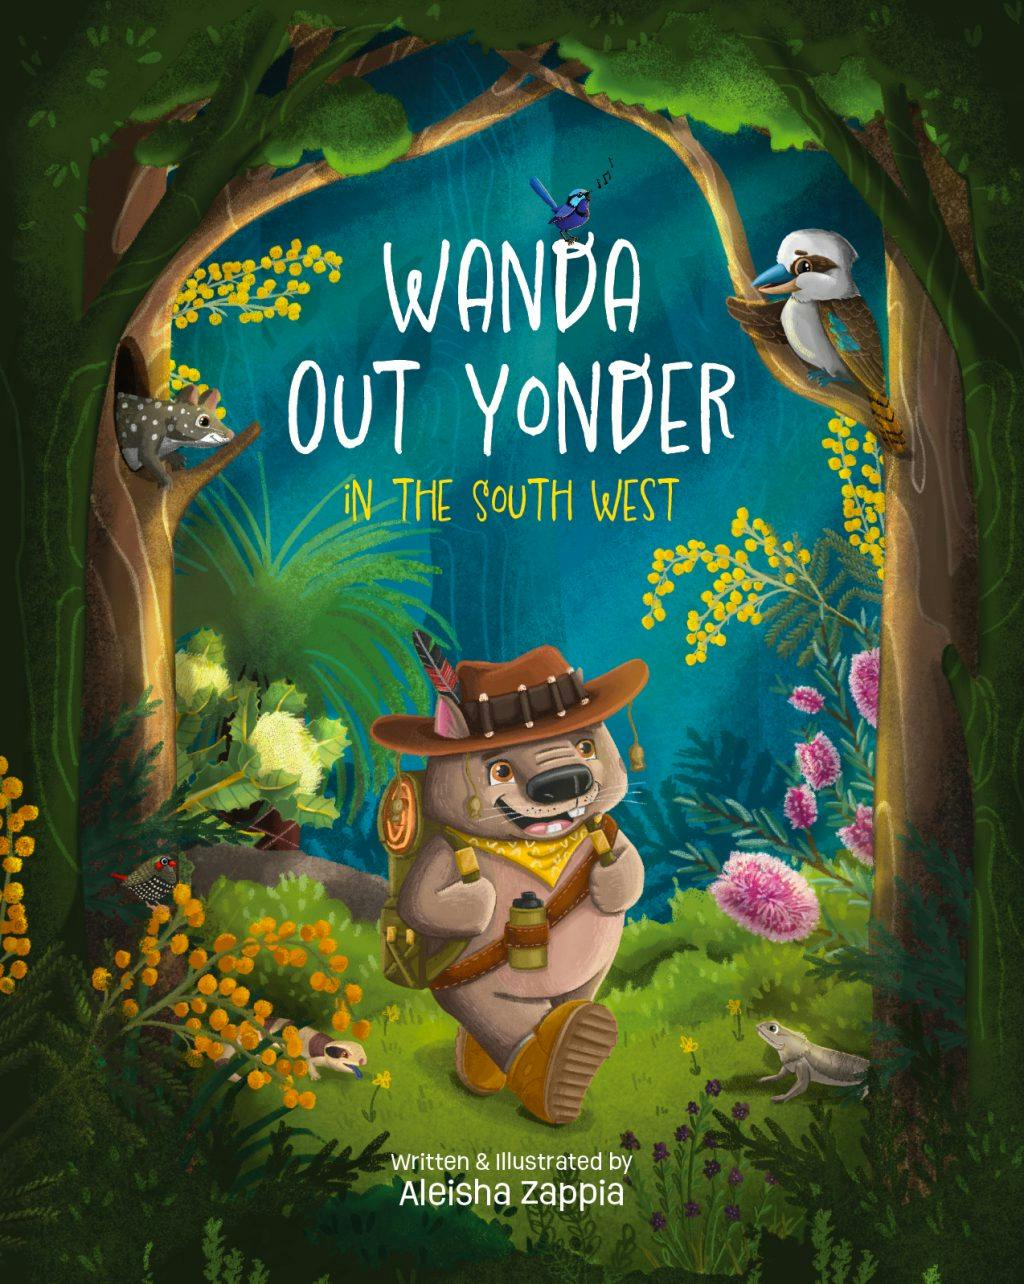 Perth Christmas Gift Guide, Wanda Out Yonder 